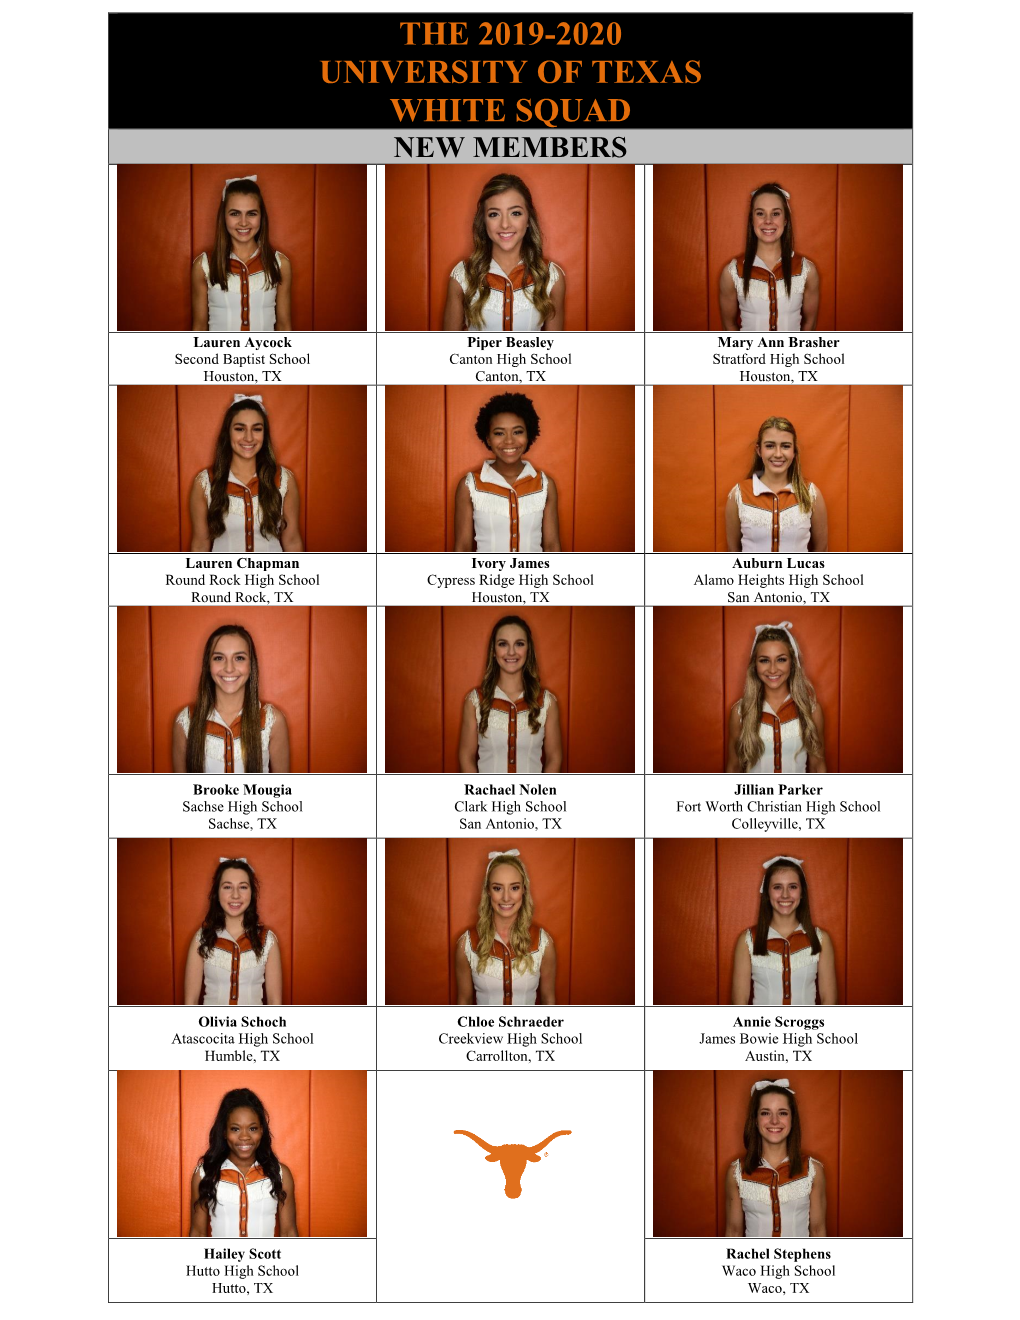 The 2019-2020 University of Texas White Squad New Members